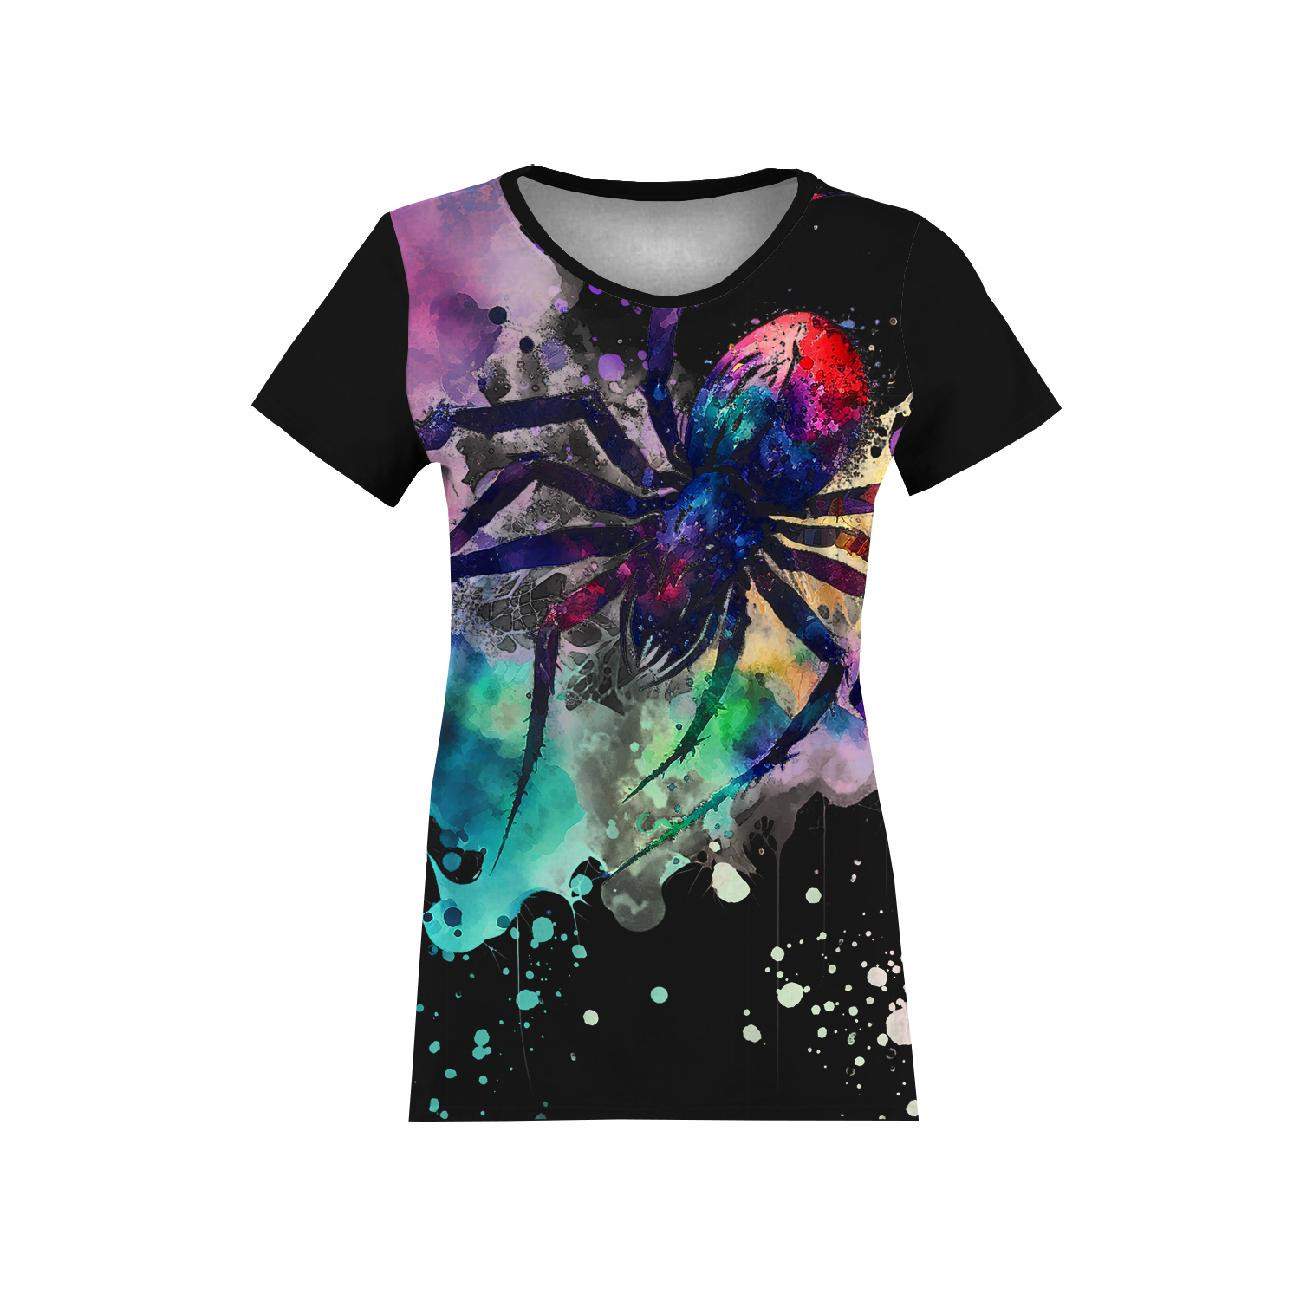 WOMEN’S T-SHIRT - WATERCOLOR SPIDER - sewing set